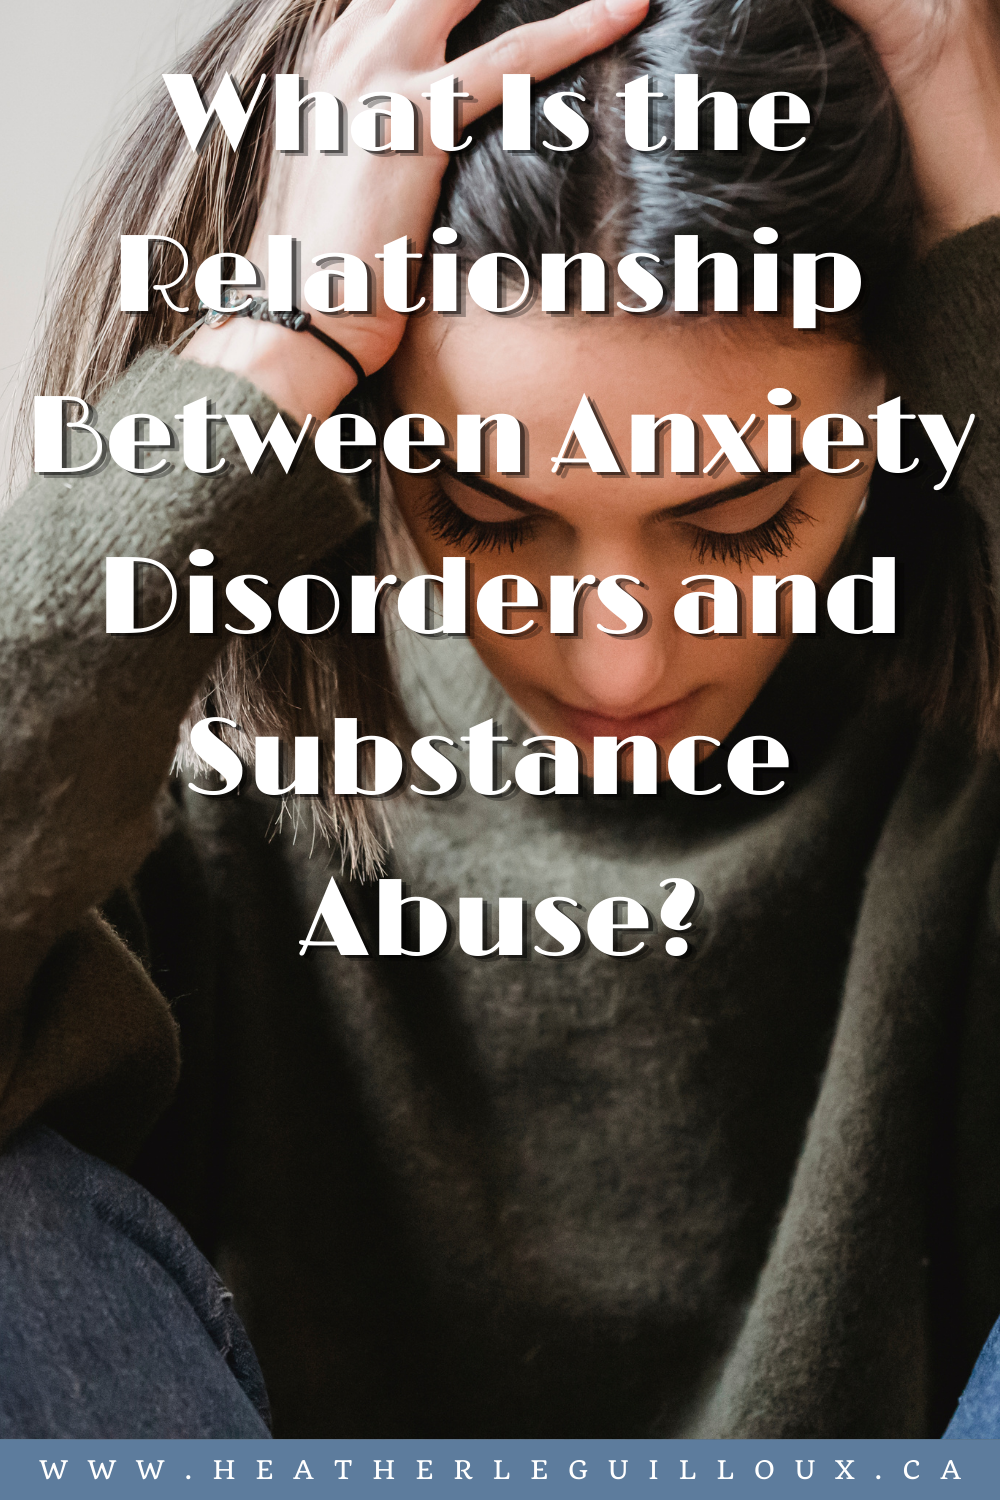 In America, anxiety disorders and substance use disorders co-occur at such great rates that they cannot be left unaddressed. Here is what you need to know. #anxiety #substanceuse #disorders #treatment